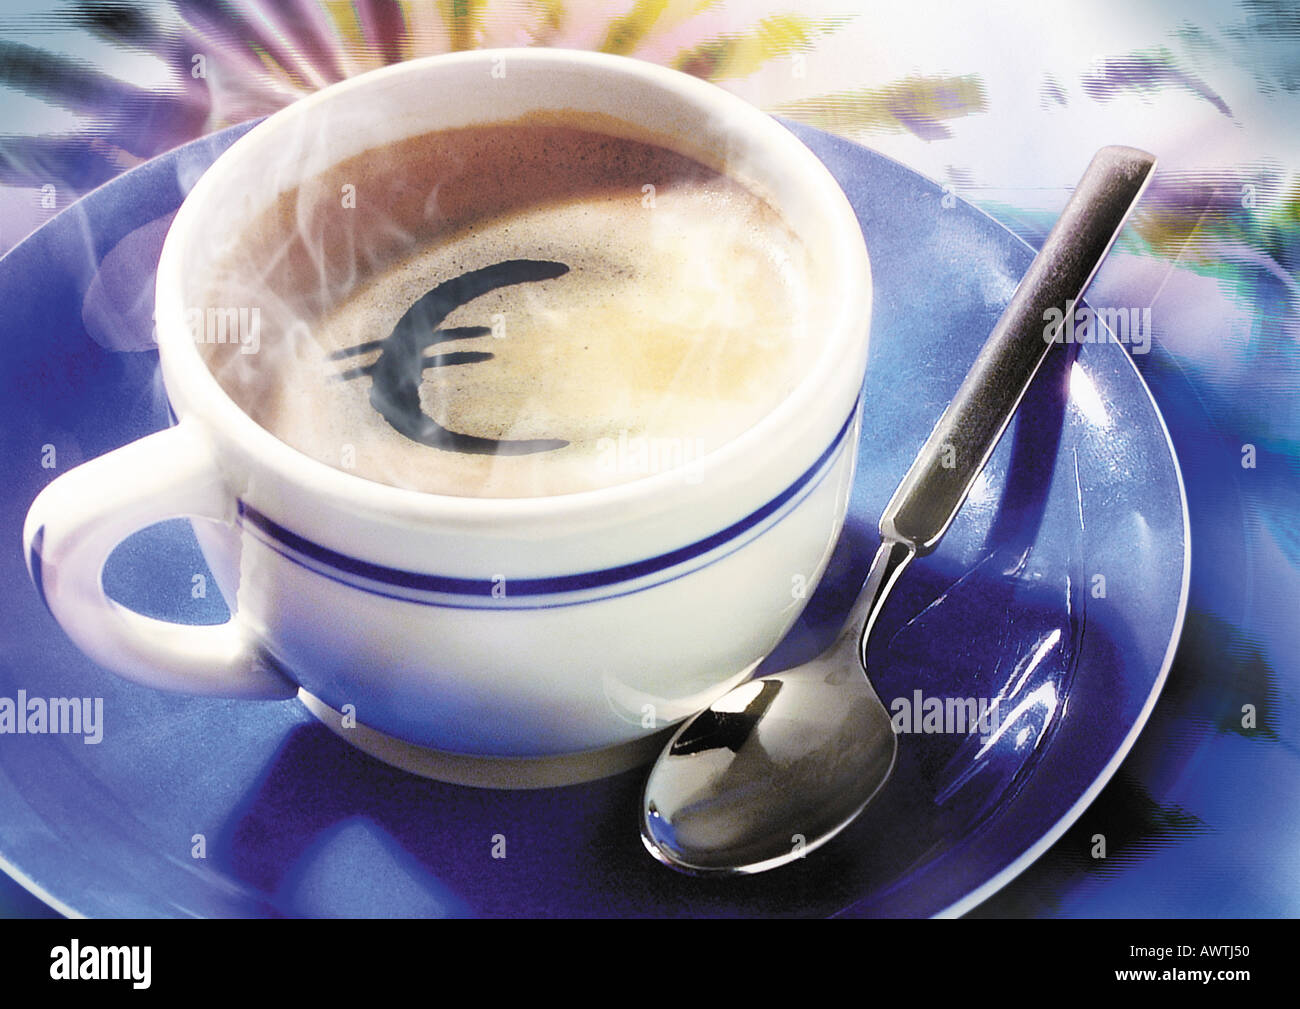 Coffee for one euro, sign ad advert Stock Photo - Alamy